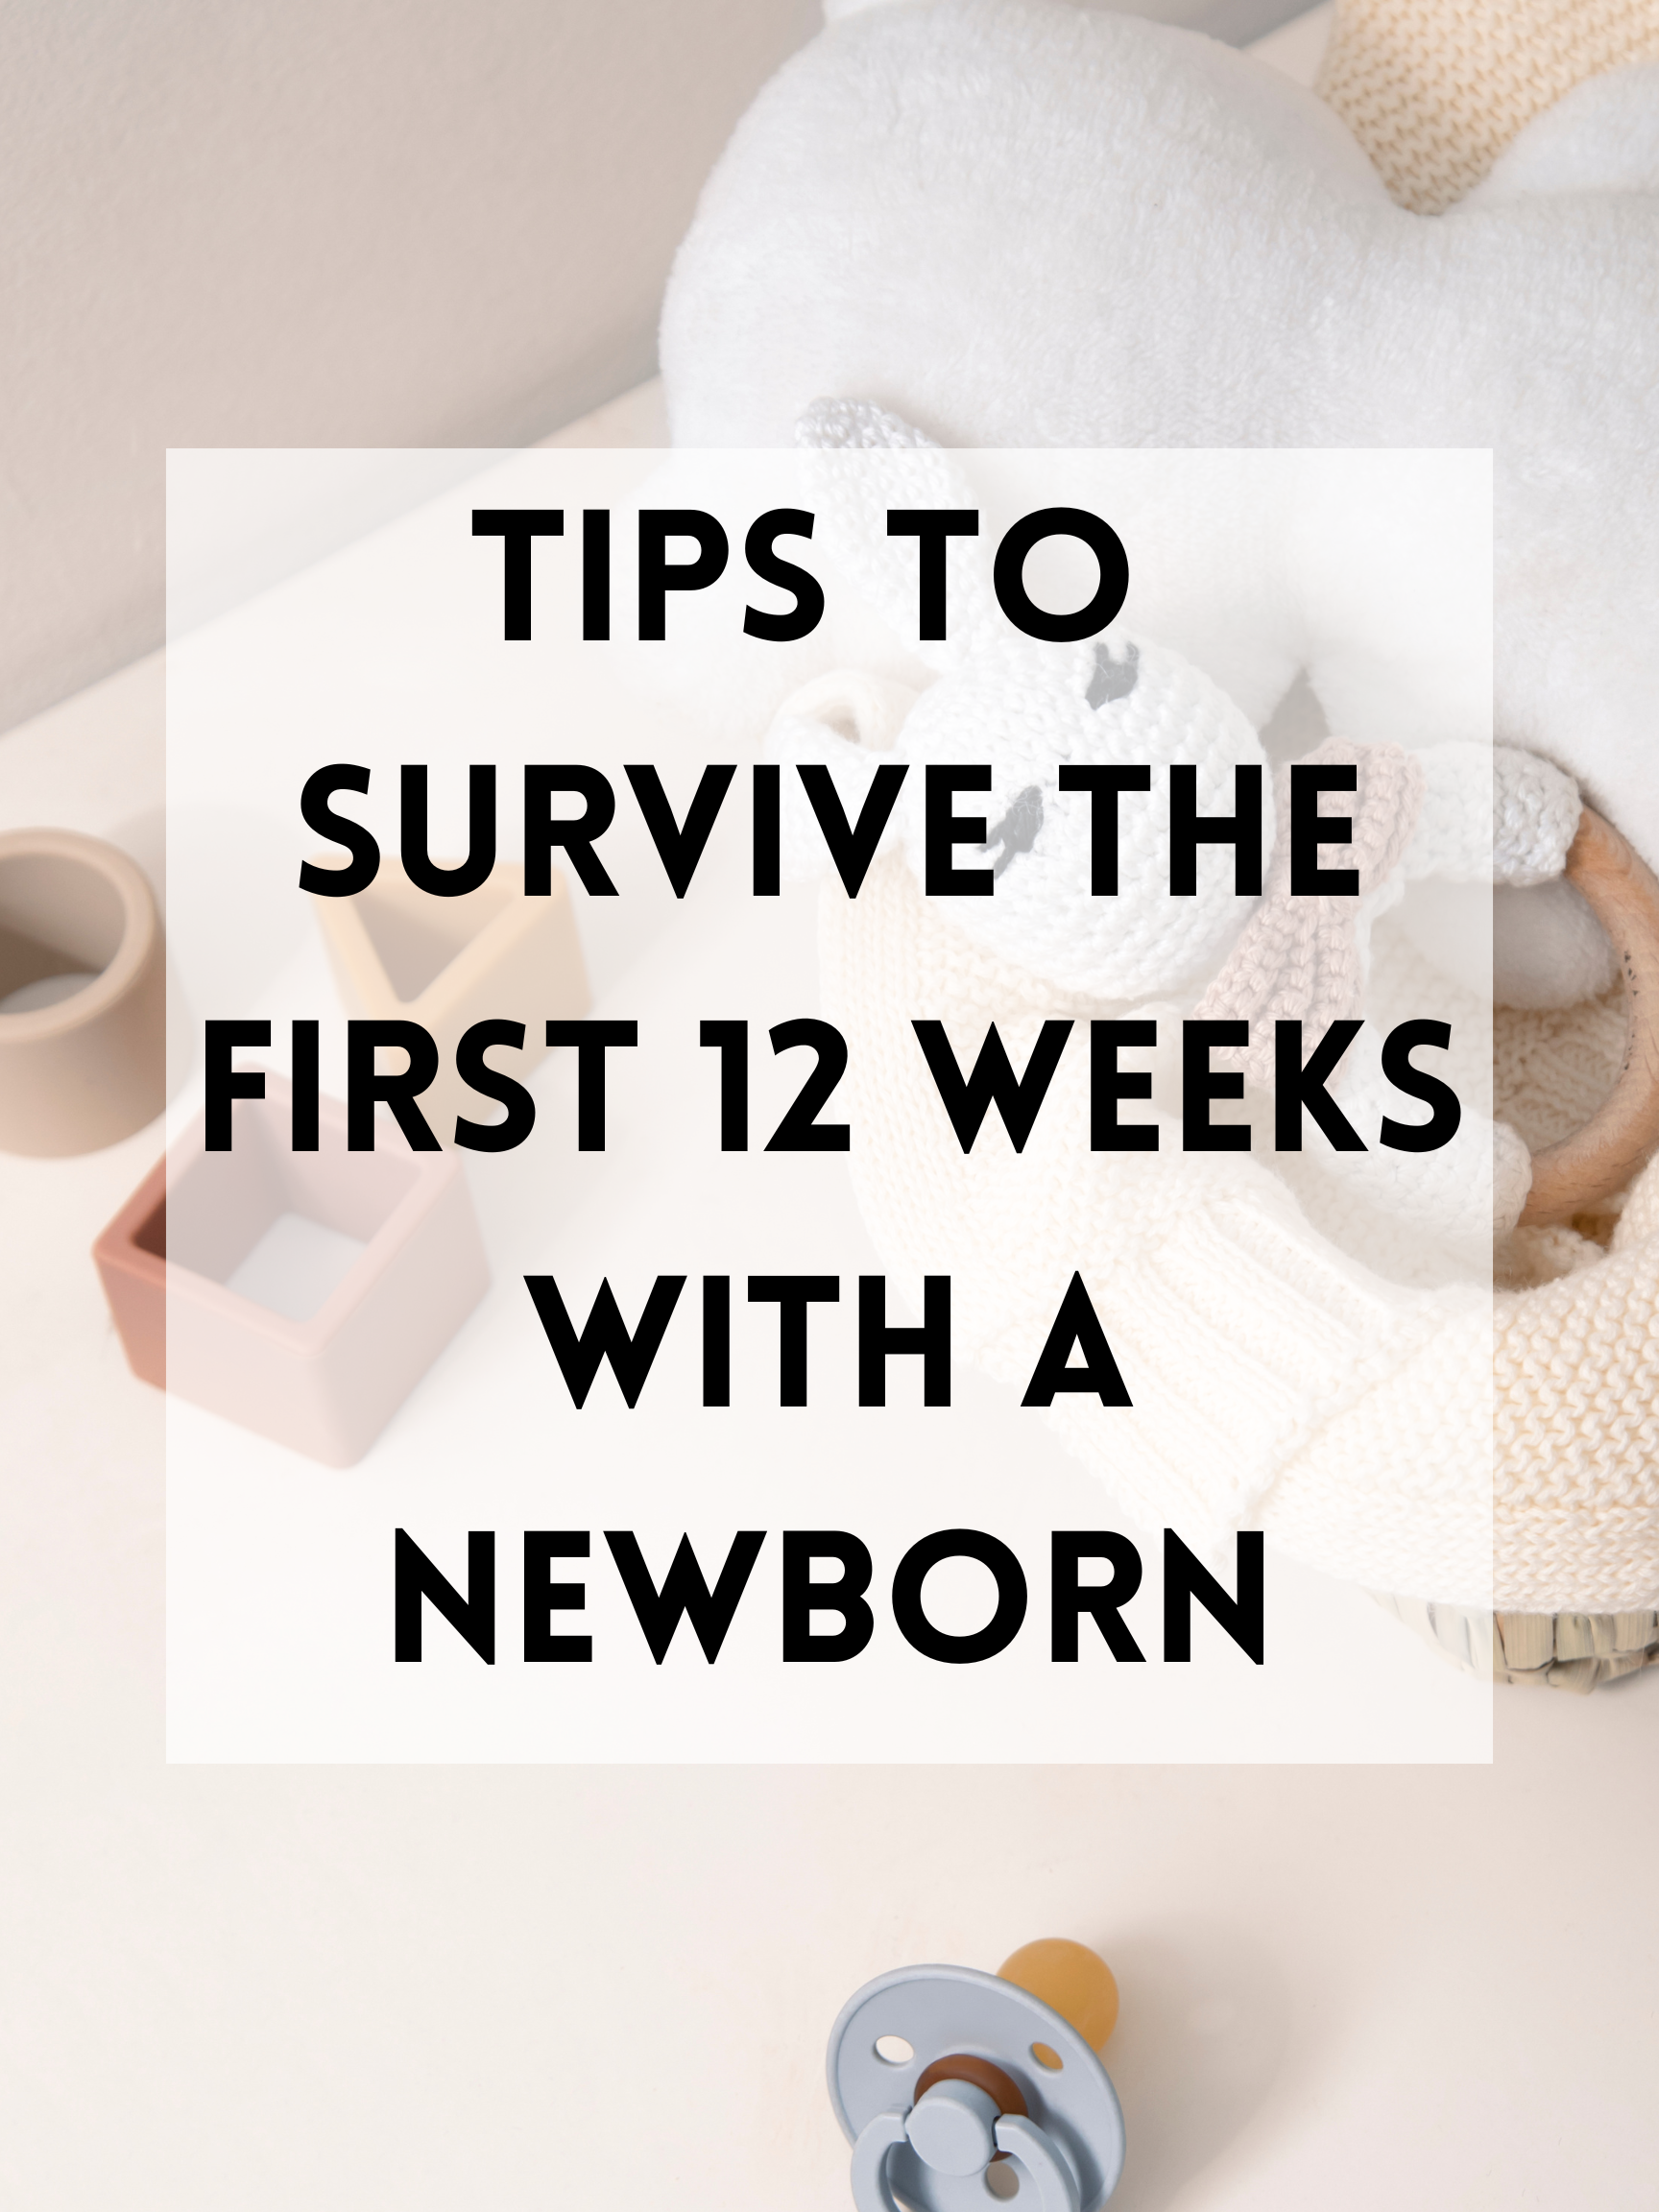 Tips to Survive the First 12 Weeks With a Newborn